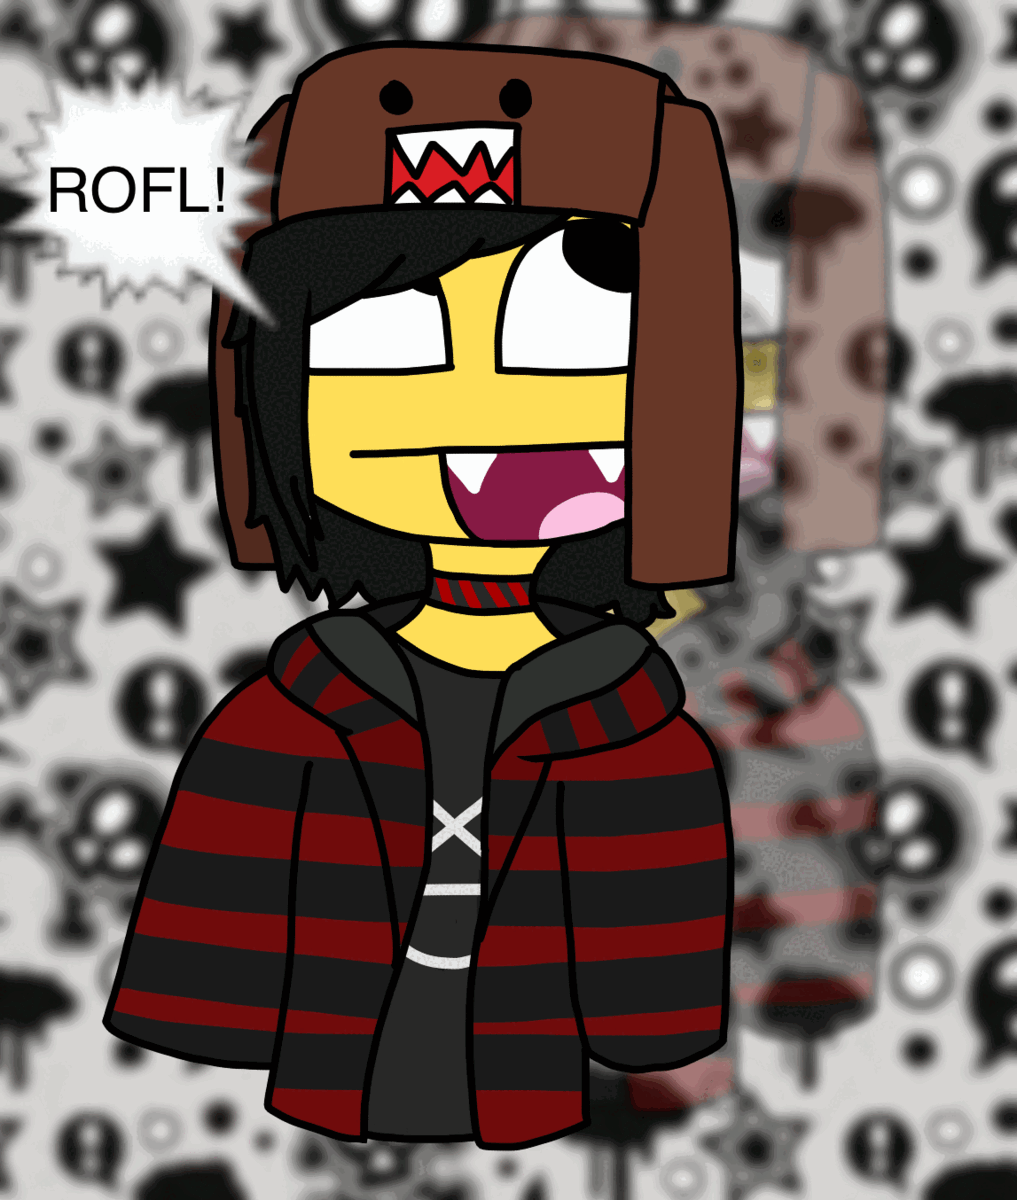 Epic Face Roblox | Poster